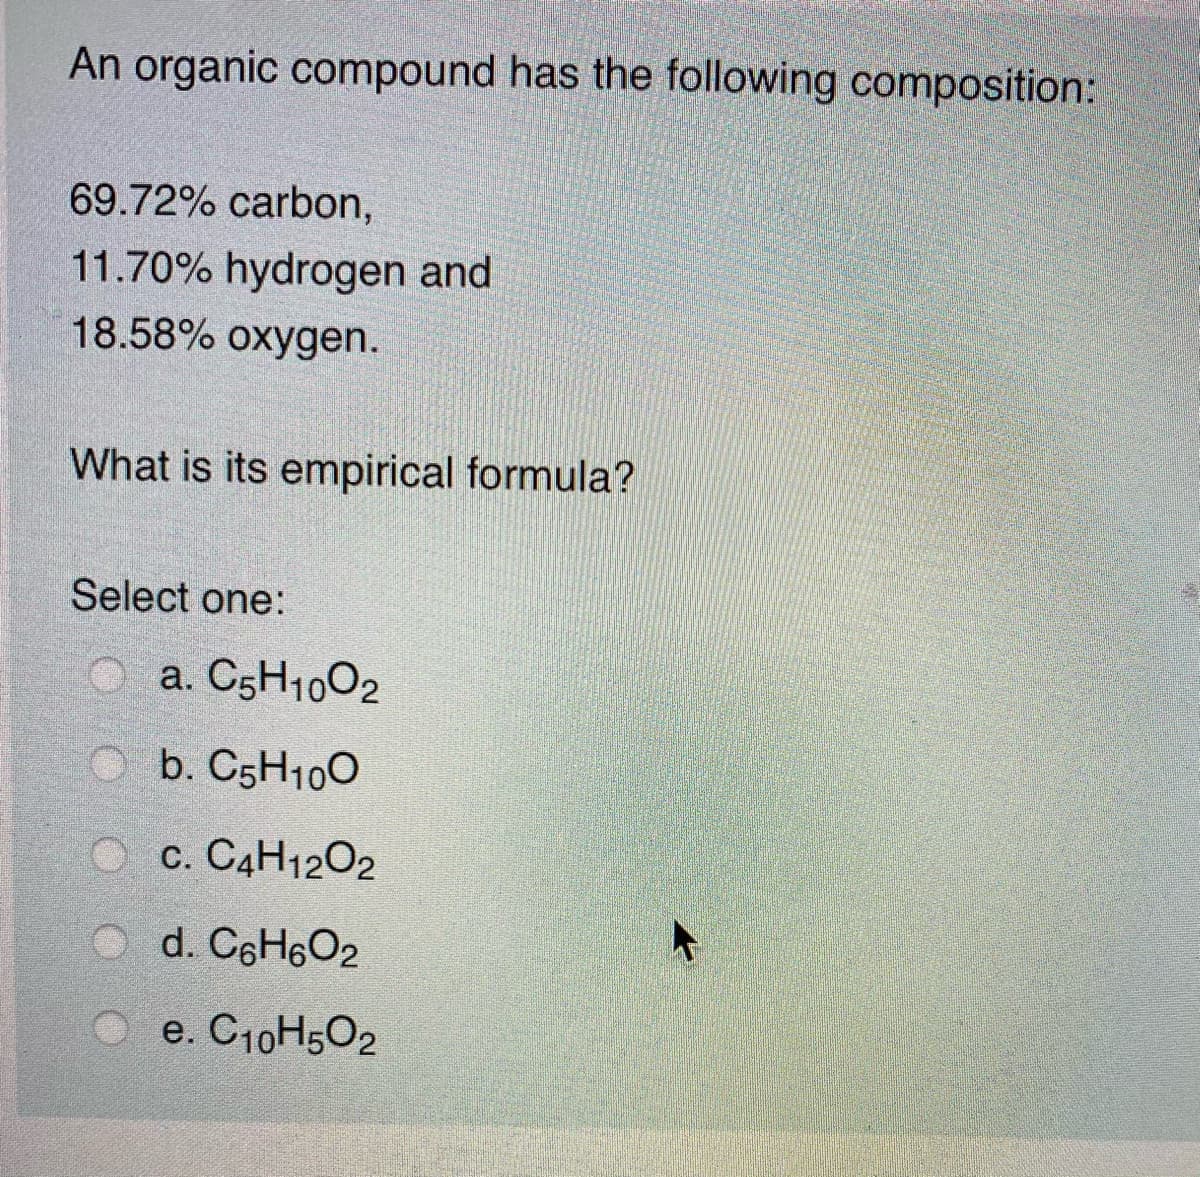 An organic compound has the following composition:
69.72% carbon,
11.70% hydrogen and
18.58% oxygen.
What is its empirical formula?
Select one:
a. C5H1002
b. C5H100
O c. C4H1202
d. C6H6O2
e. C10H502
